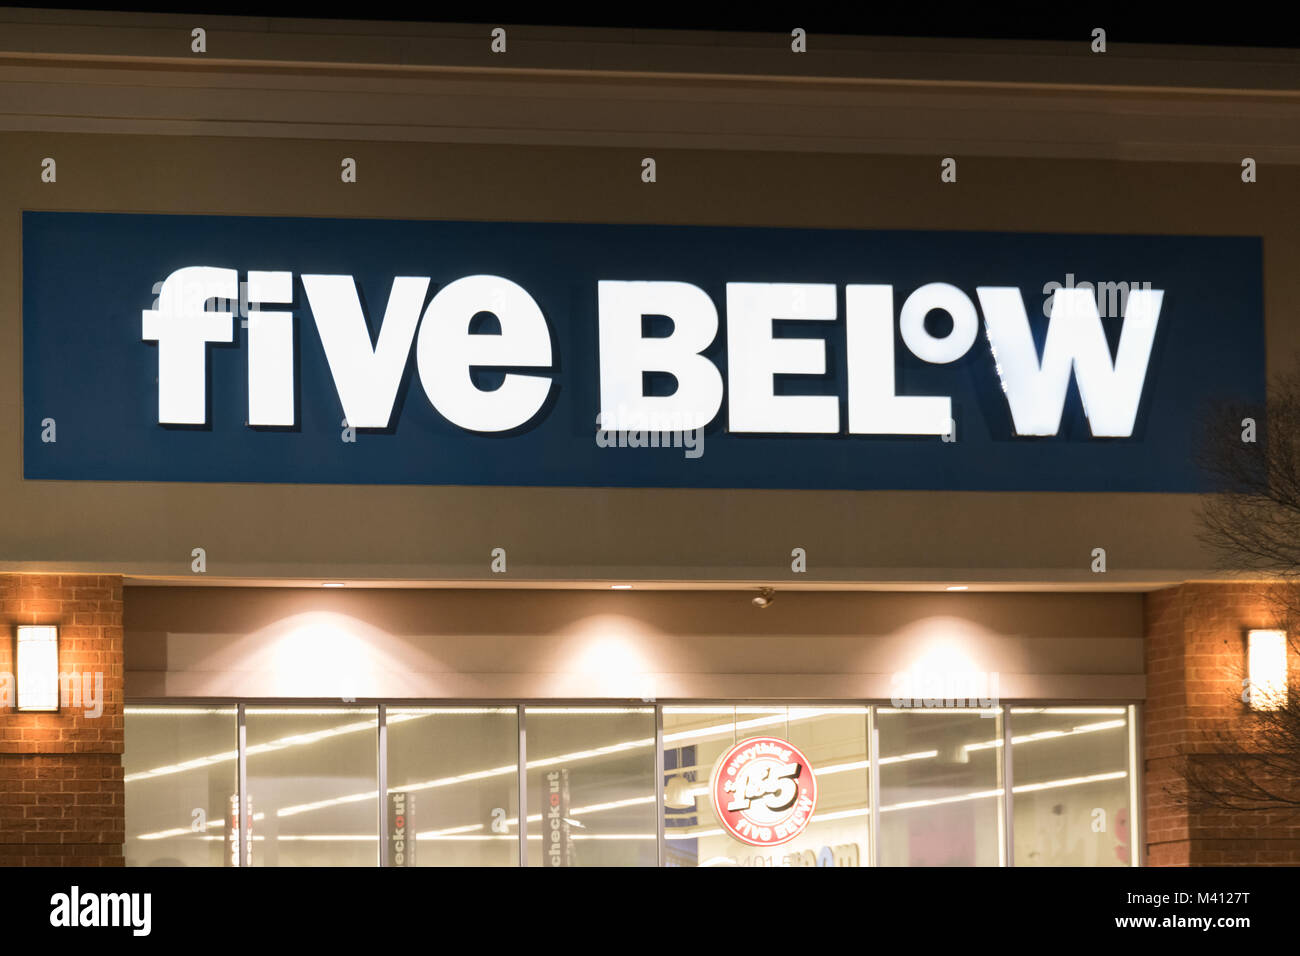 Five Below discount store sign at night Stock Photo